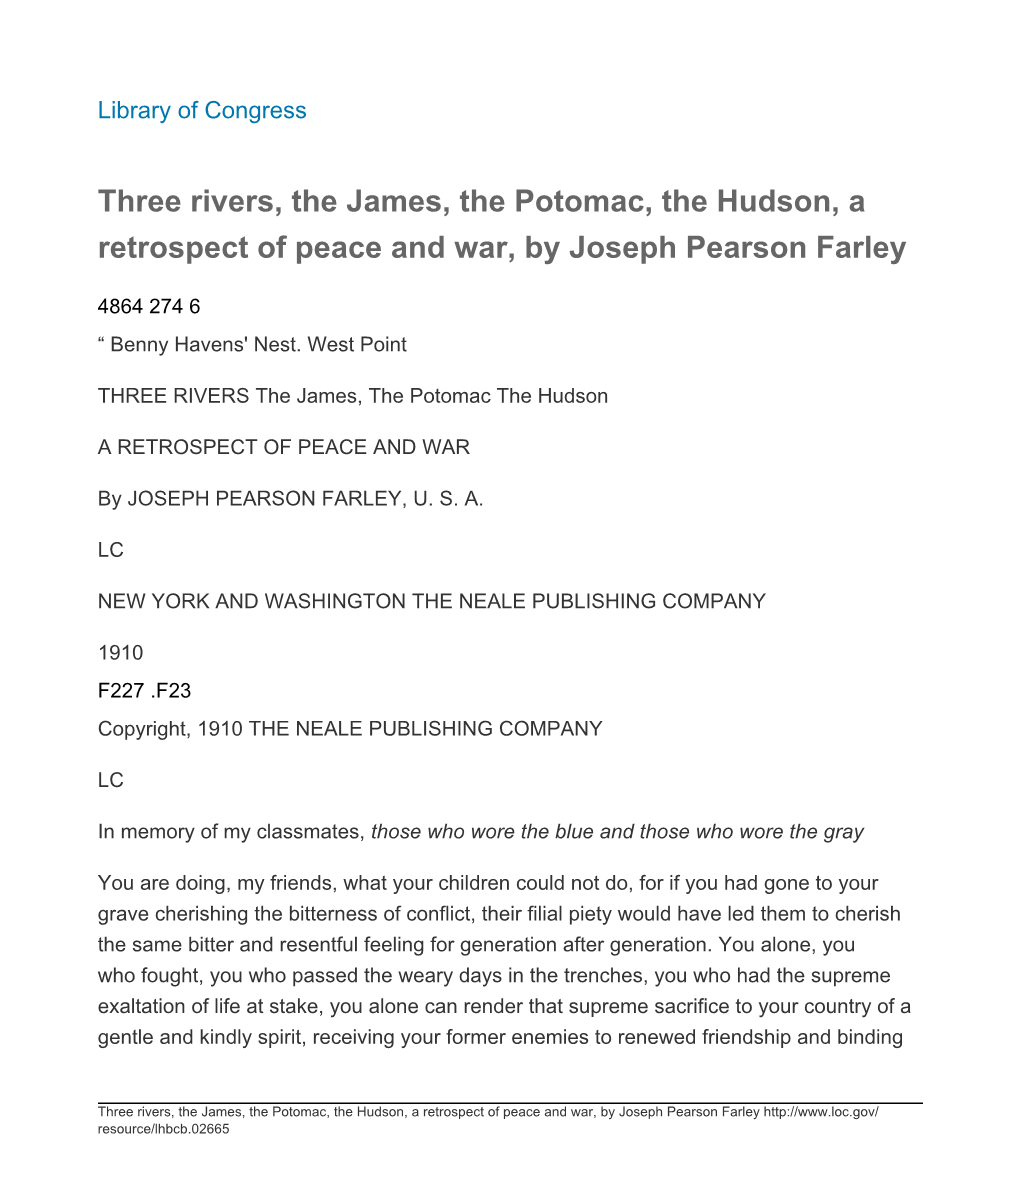 Three Rivers, the James, the Potomac, the Hudson, a Retrospect of Peace and War, by Joseph Pearson Farley